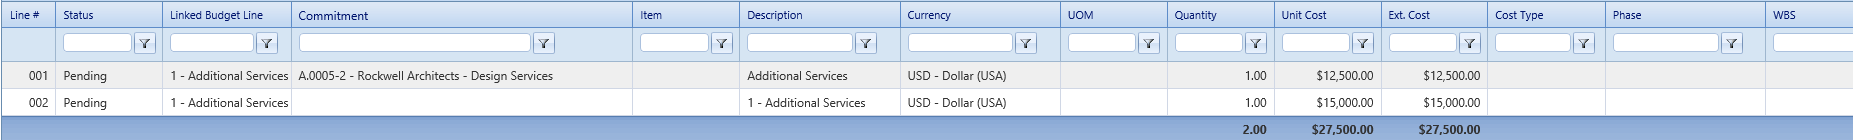 6. Change Events Details Tab Cost Table